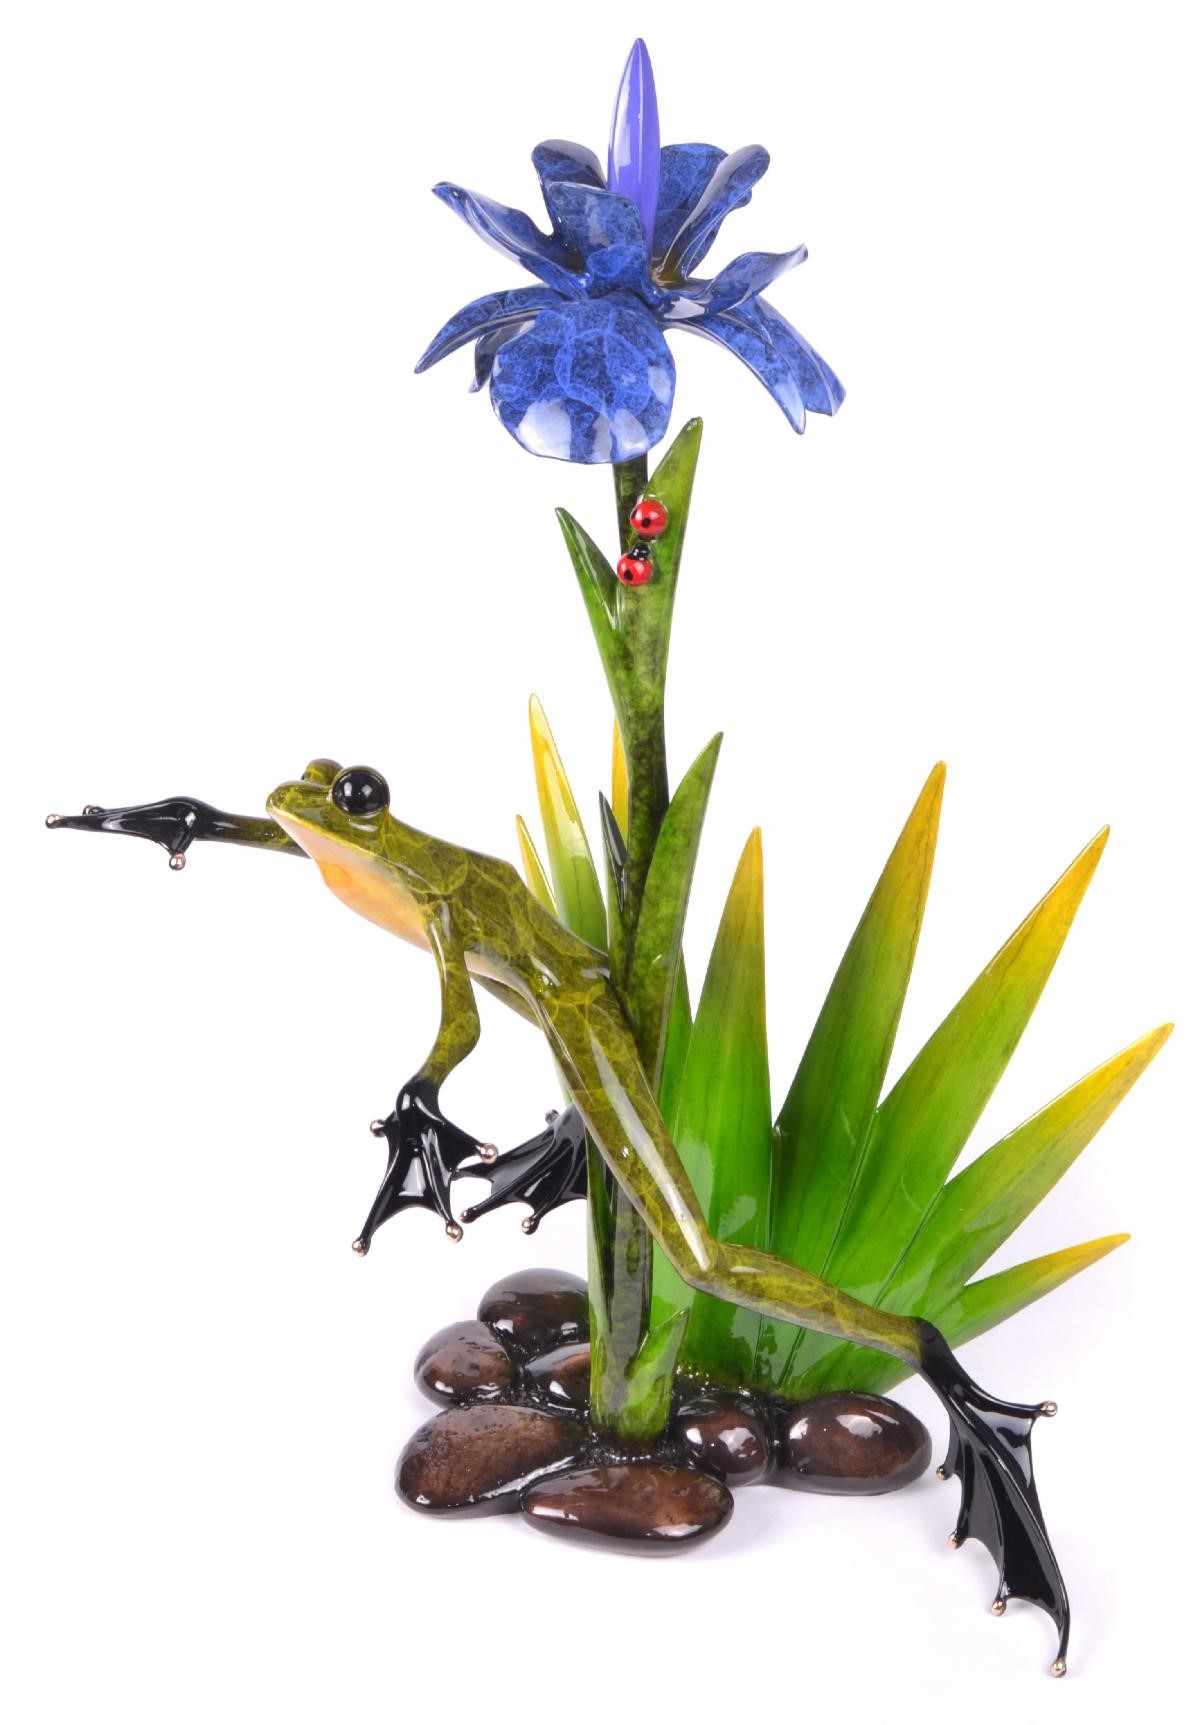 Signed, limited edition bronze frog with flower sculpture by Tim Cotterill